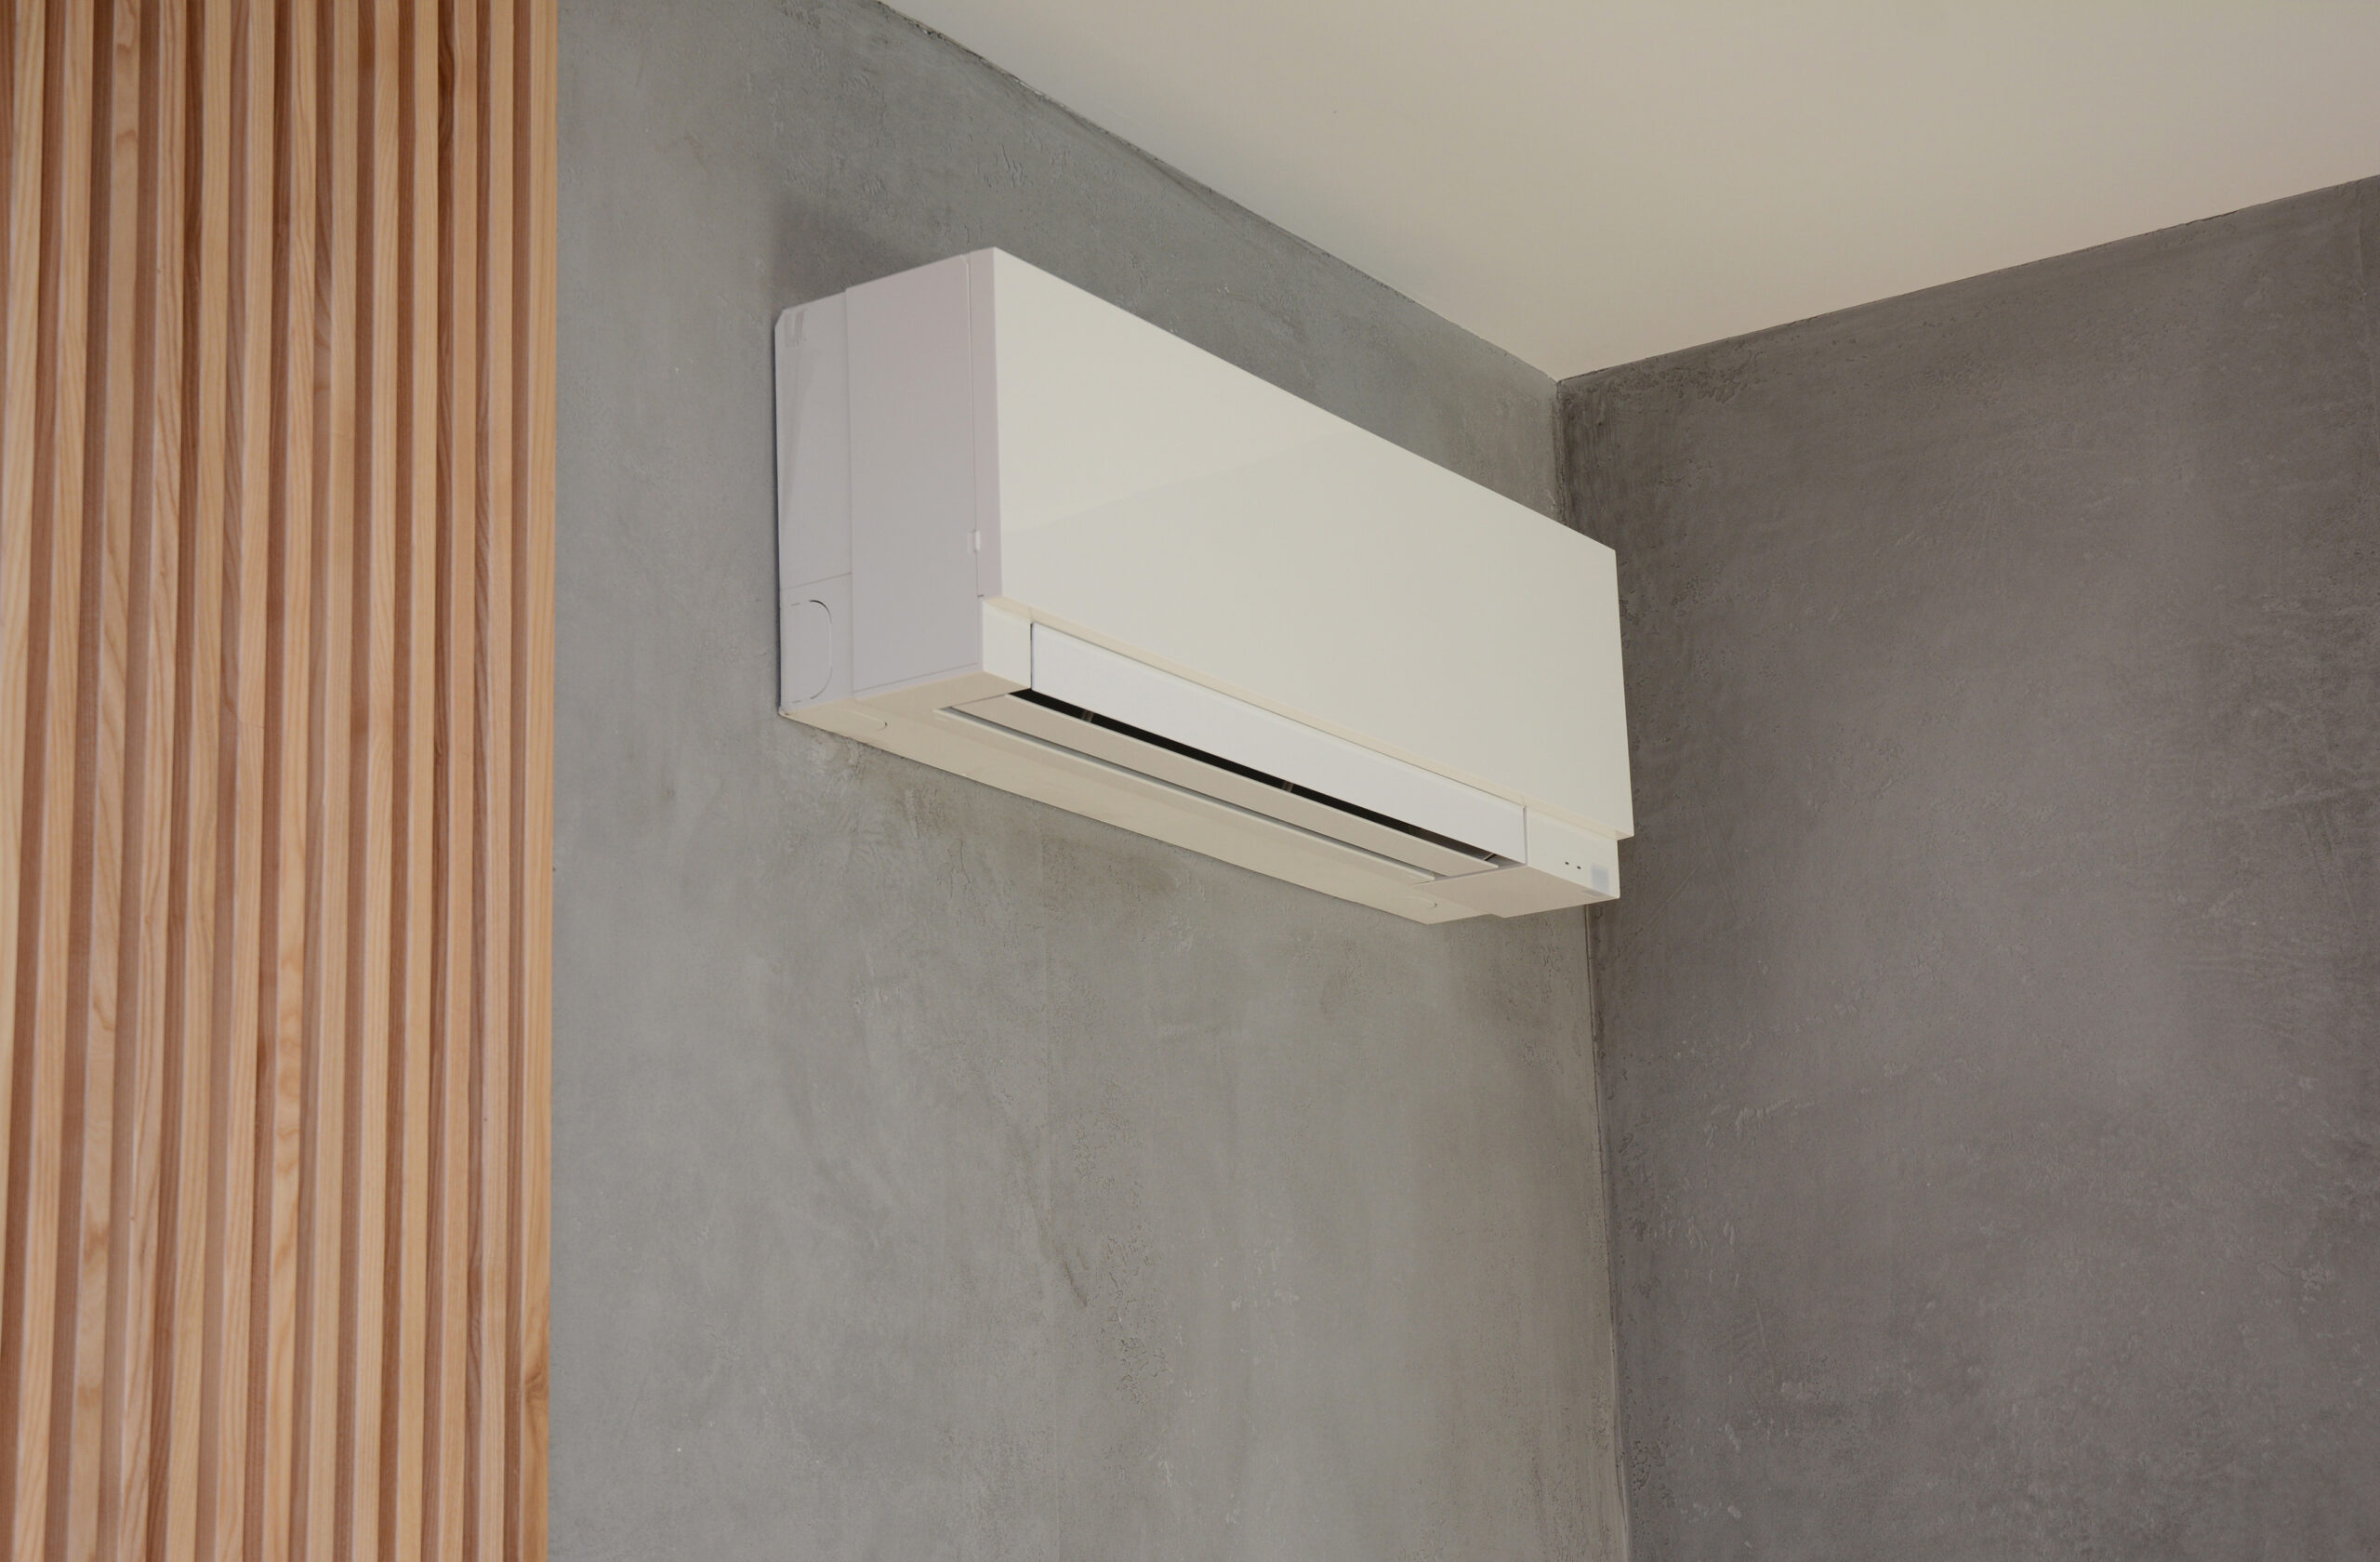 How Are Ductless Mini-Splits Connected?